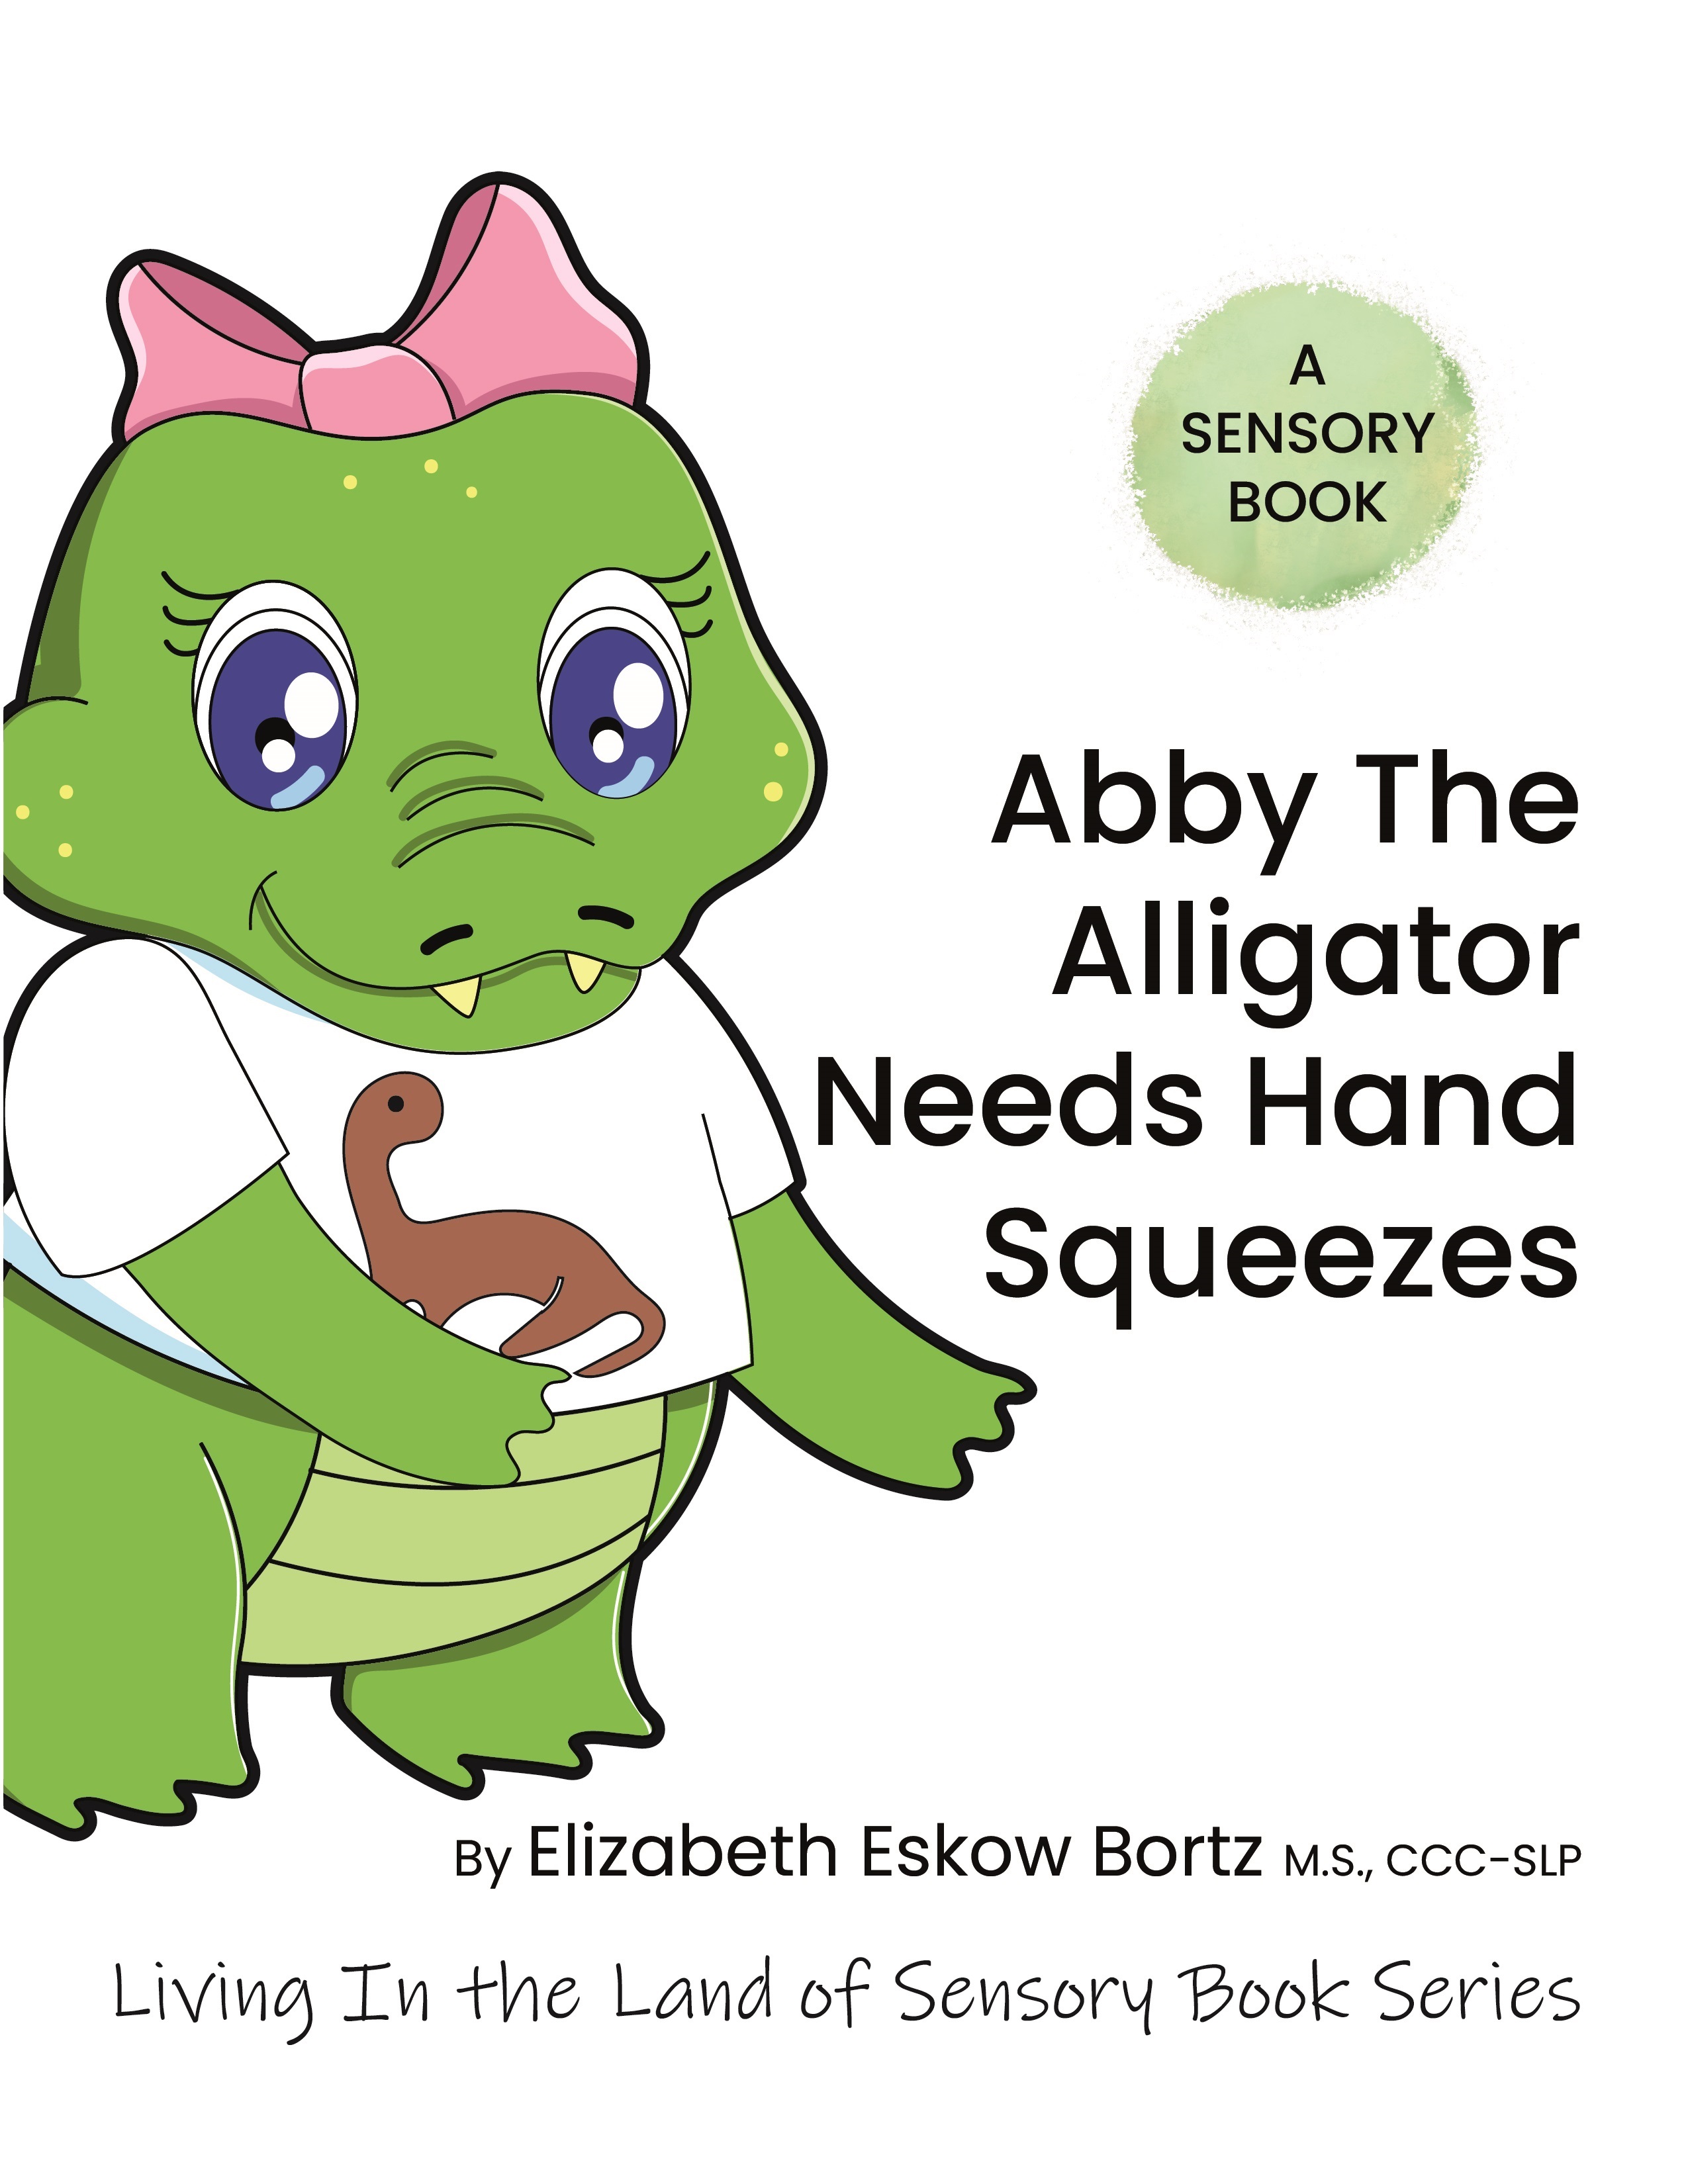 Abby the Alligator Needs Hand Squeezes is designed to help give you an immediate strategy and tips to help make a difference.